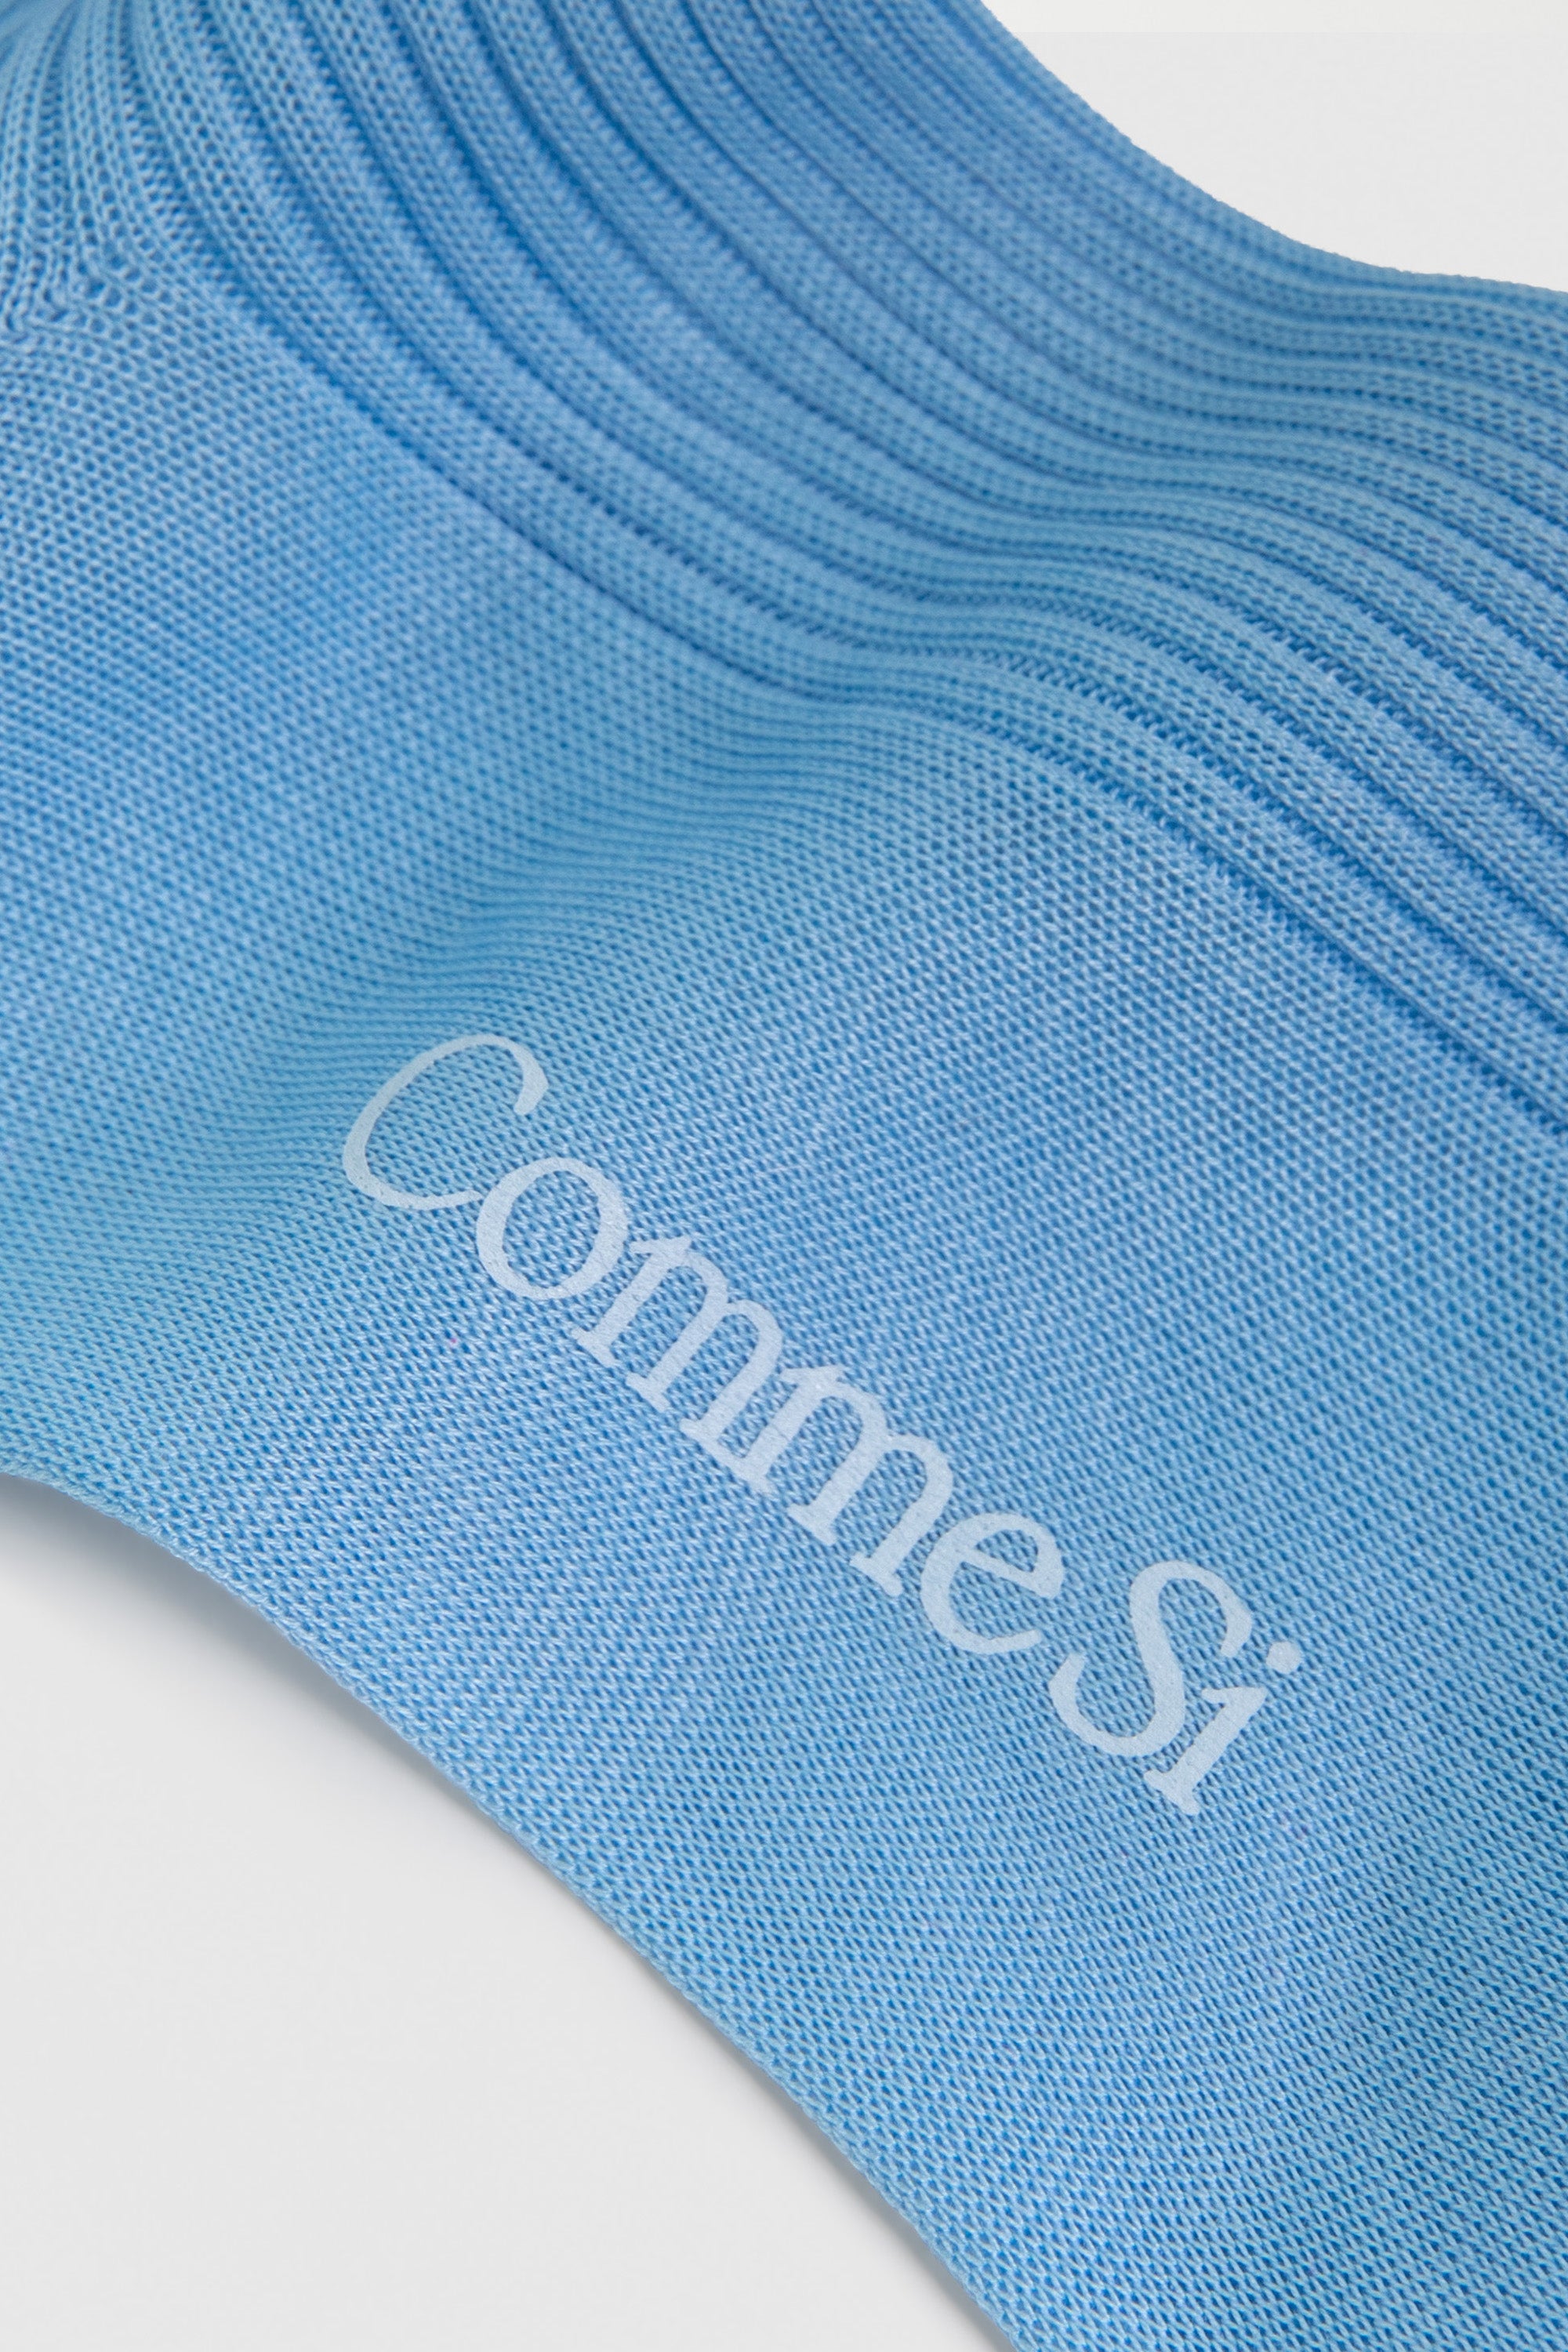 Footbed detail of The Agnelli Sock in Capri, made with Egyptian Cotton by Comme Si